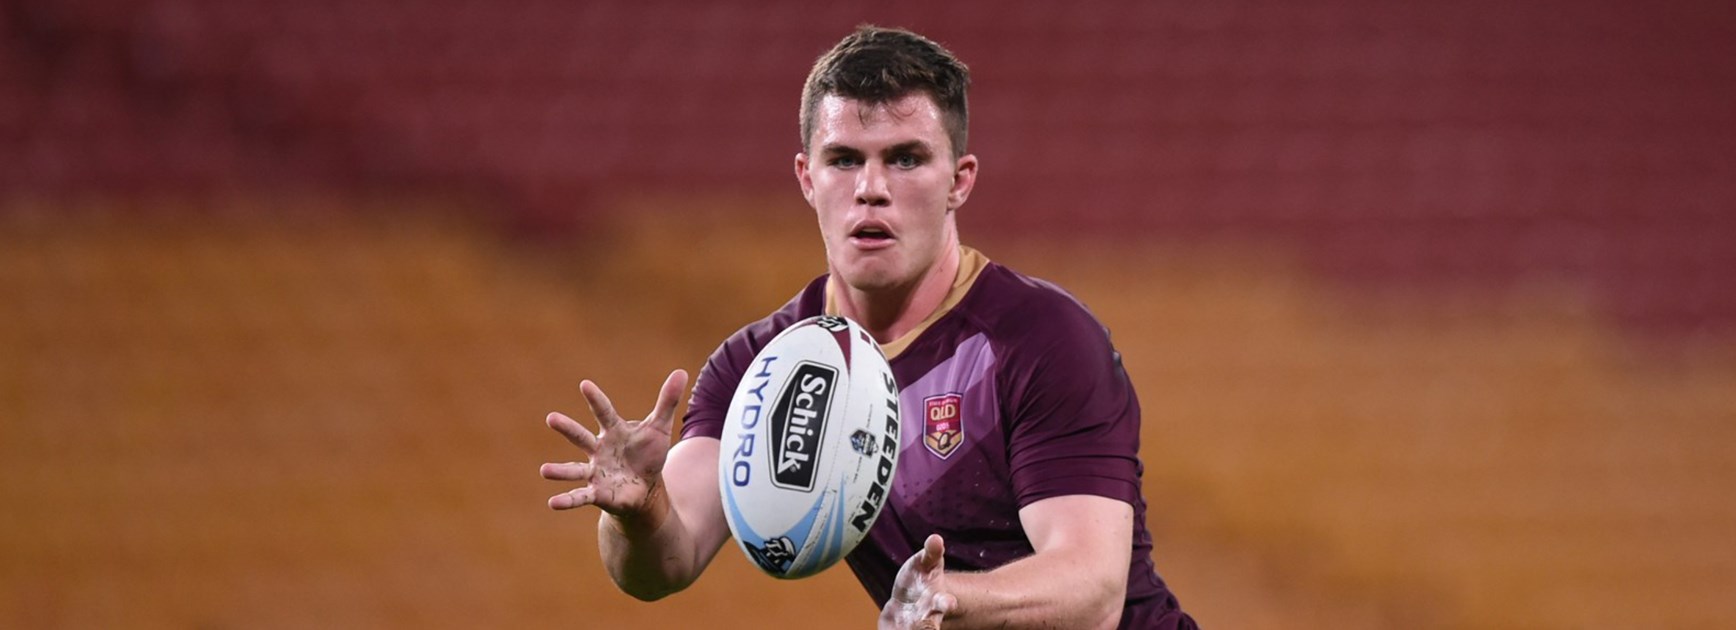 ‘I’d do anything for that jersey’: Fermor eager to fulfil Maroons dream